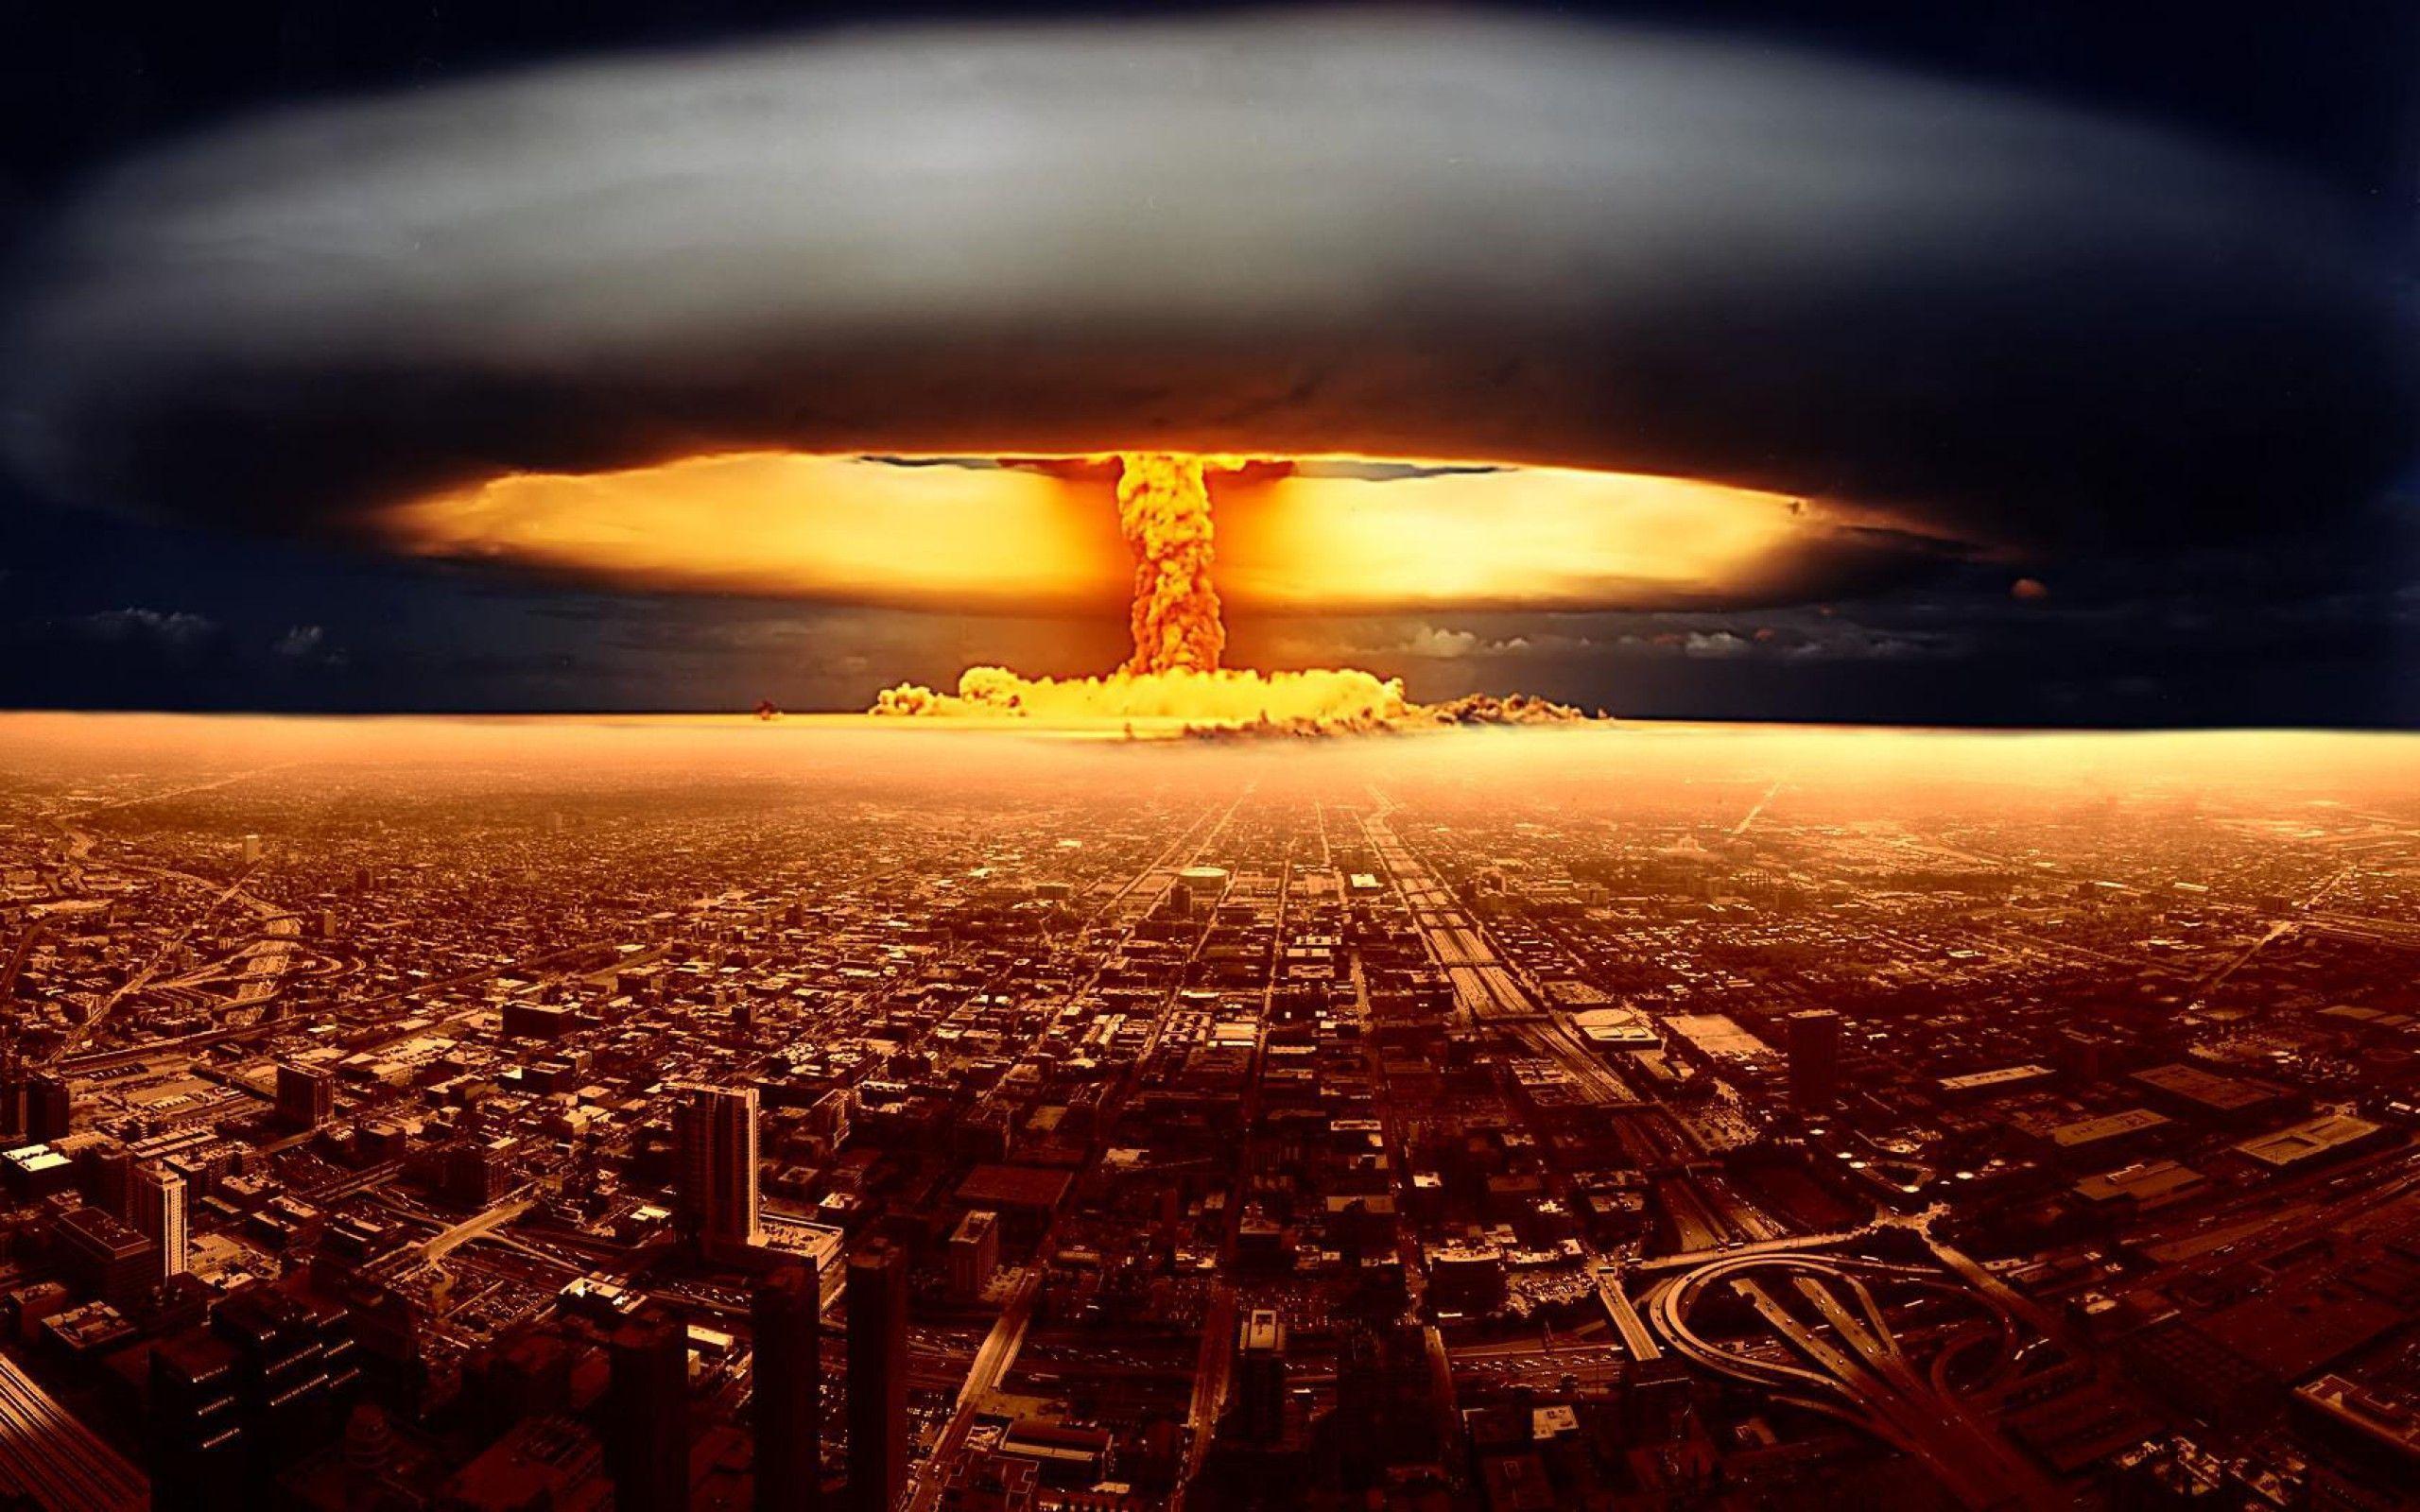 Nuclear Explosion Wallpapers - Wallpaper Cave